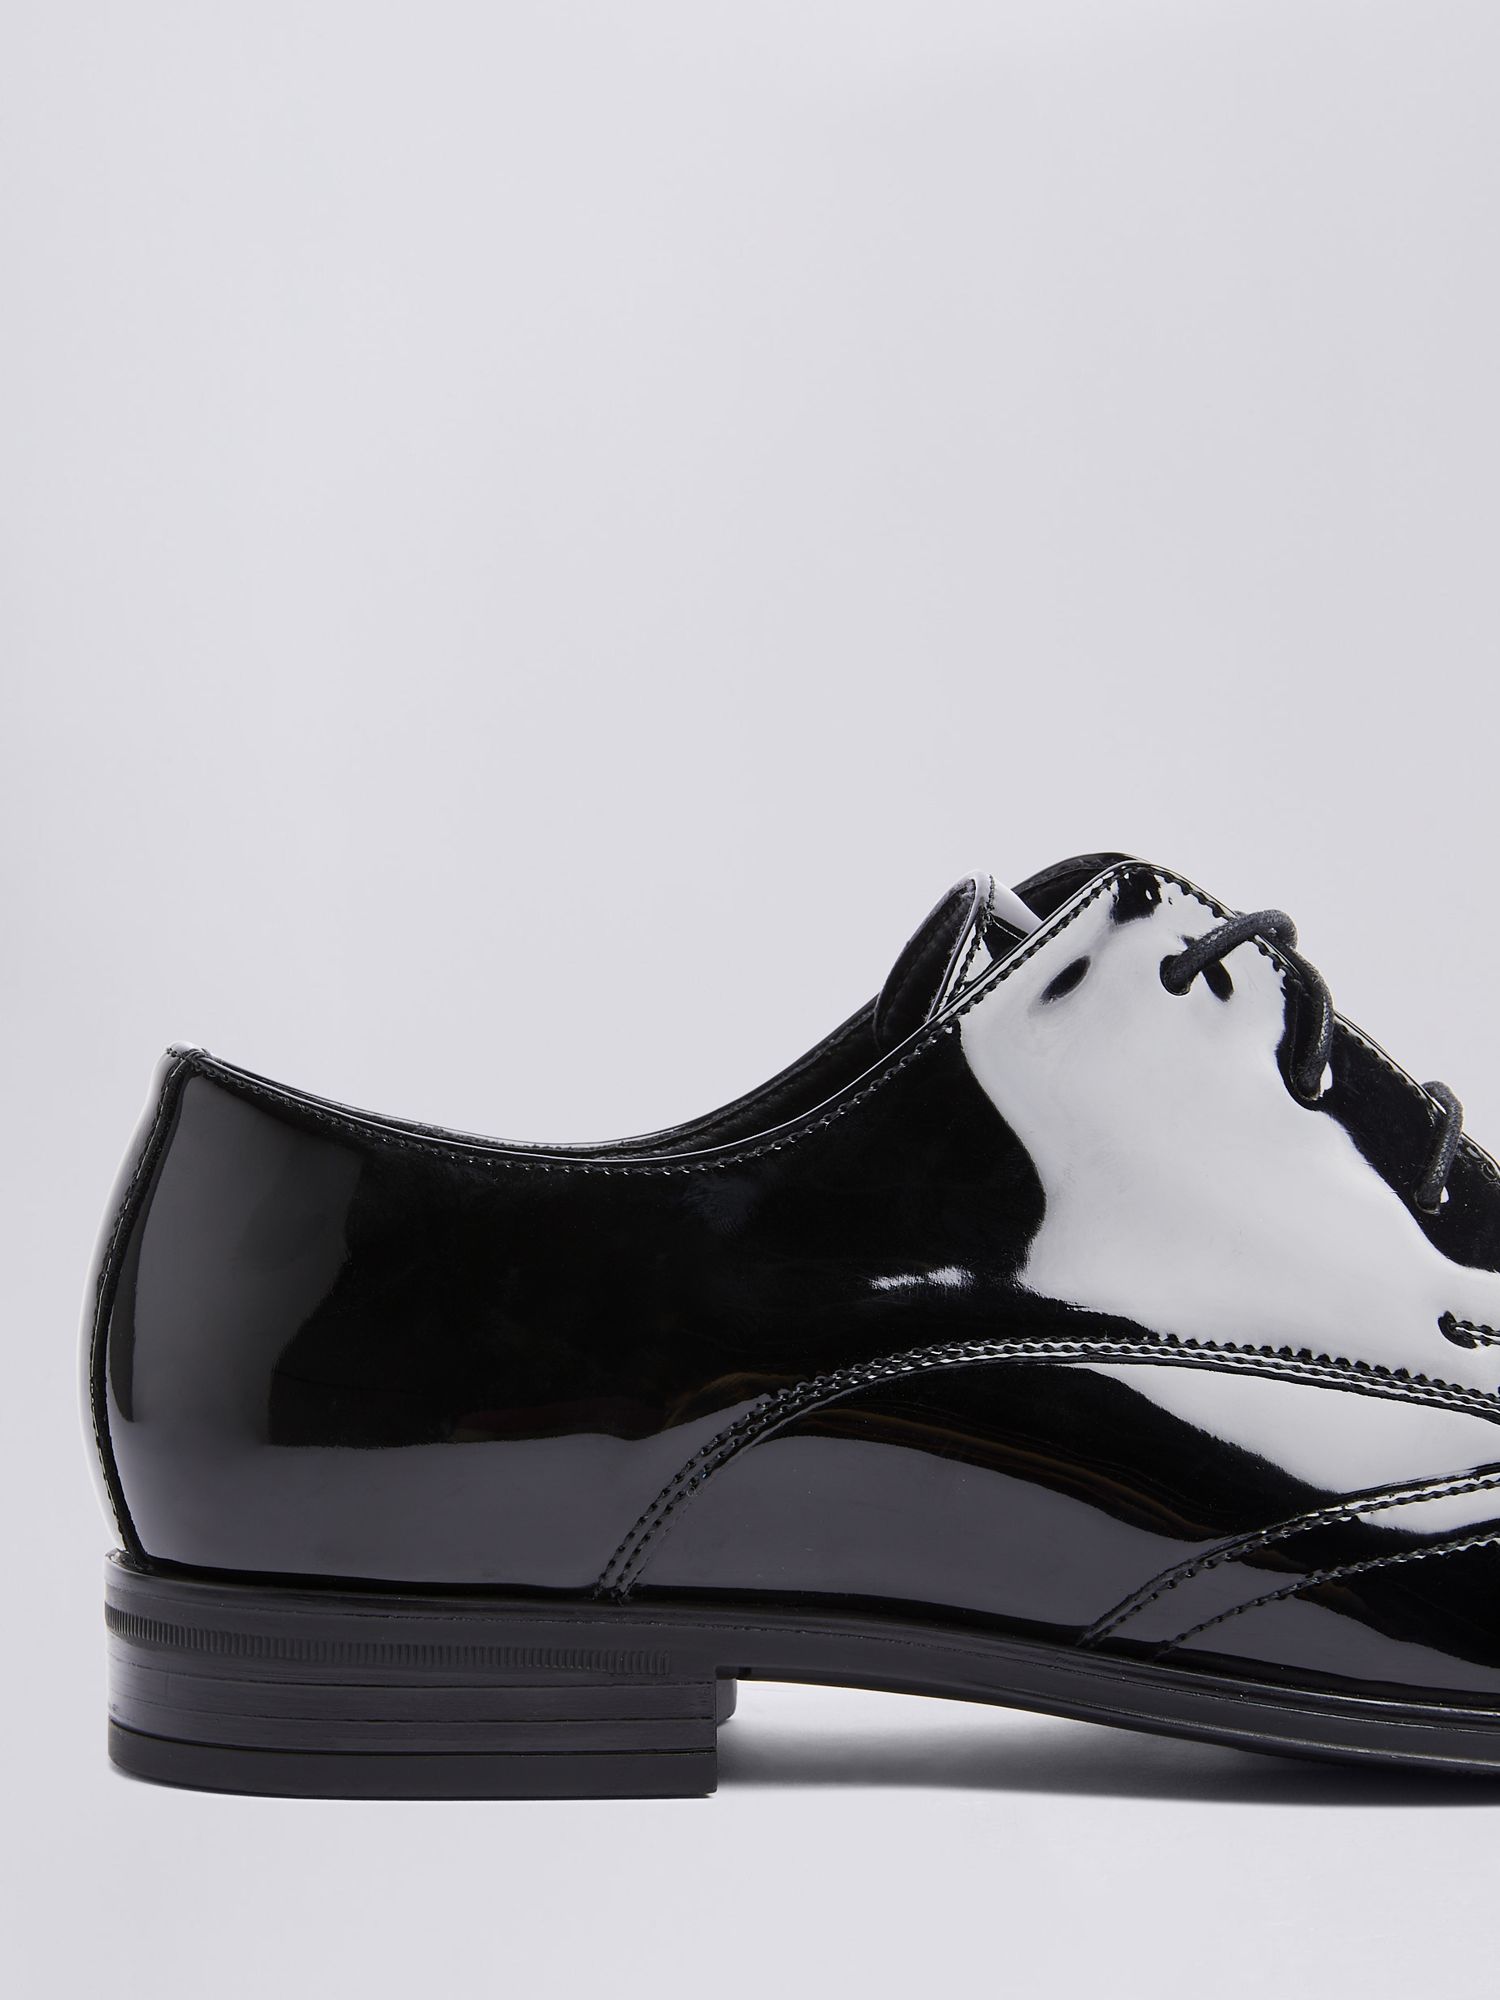 Mens Formal Shoes, Brogues & Derby Formal Shoes